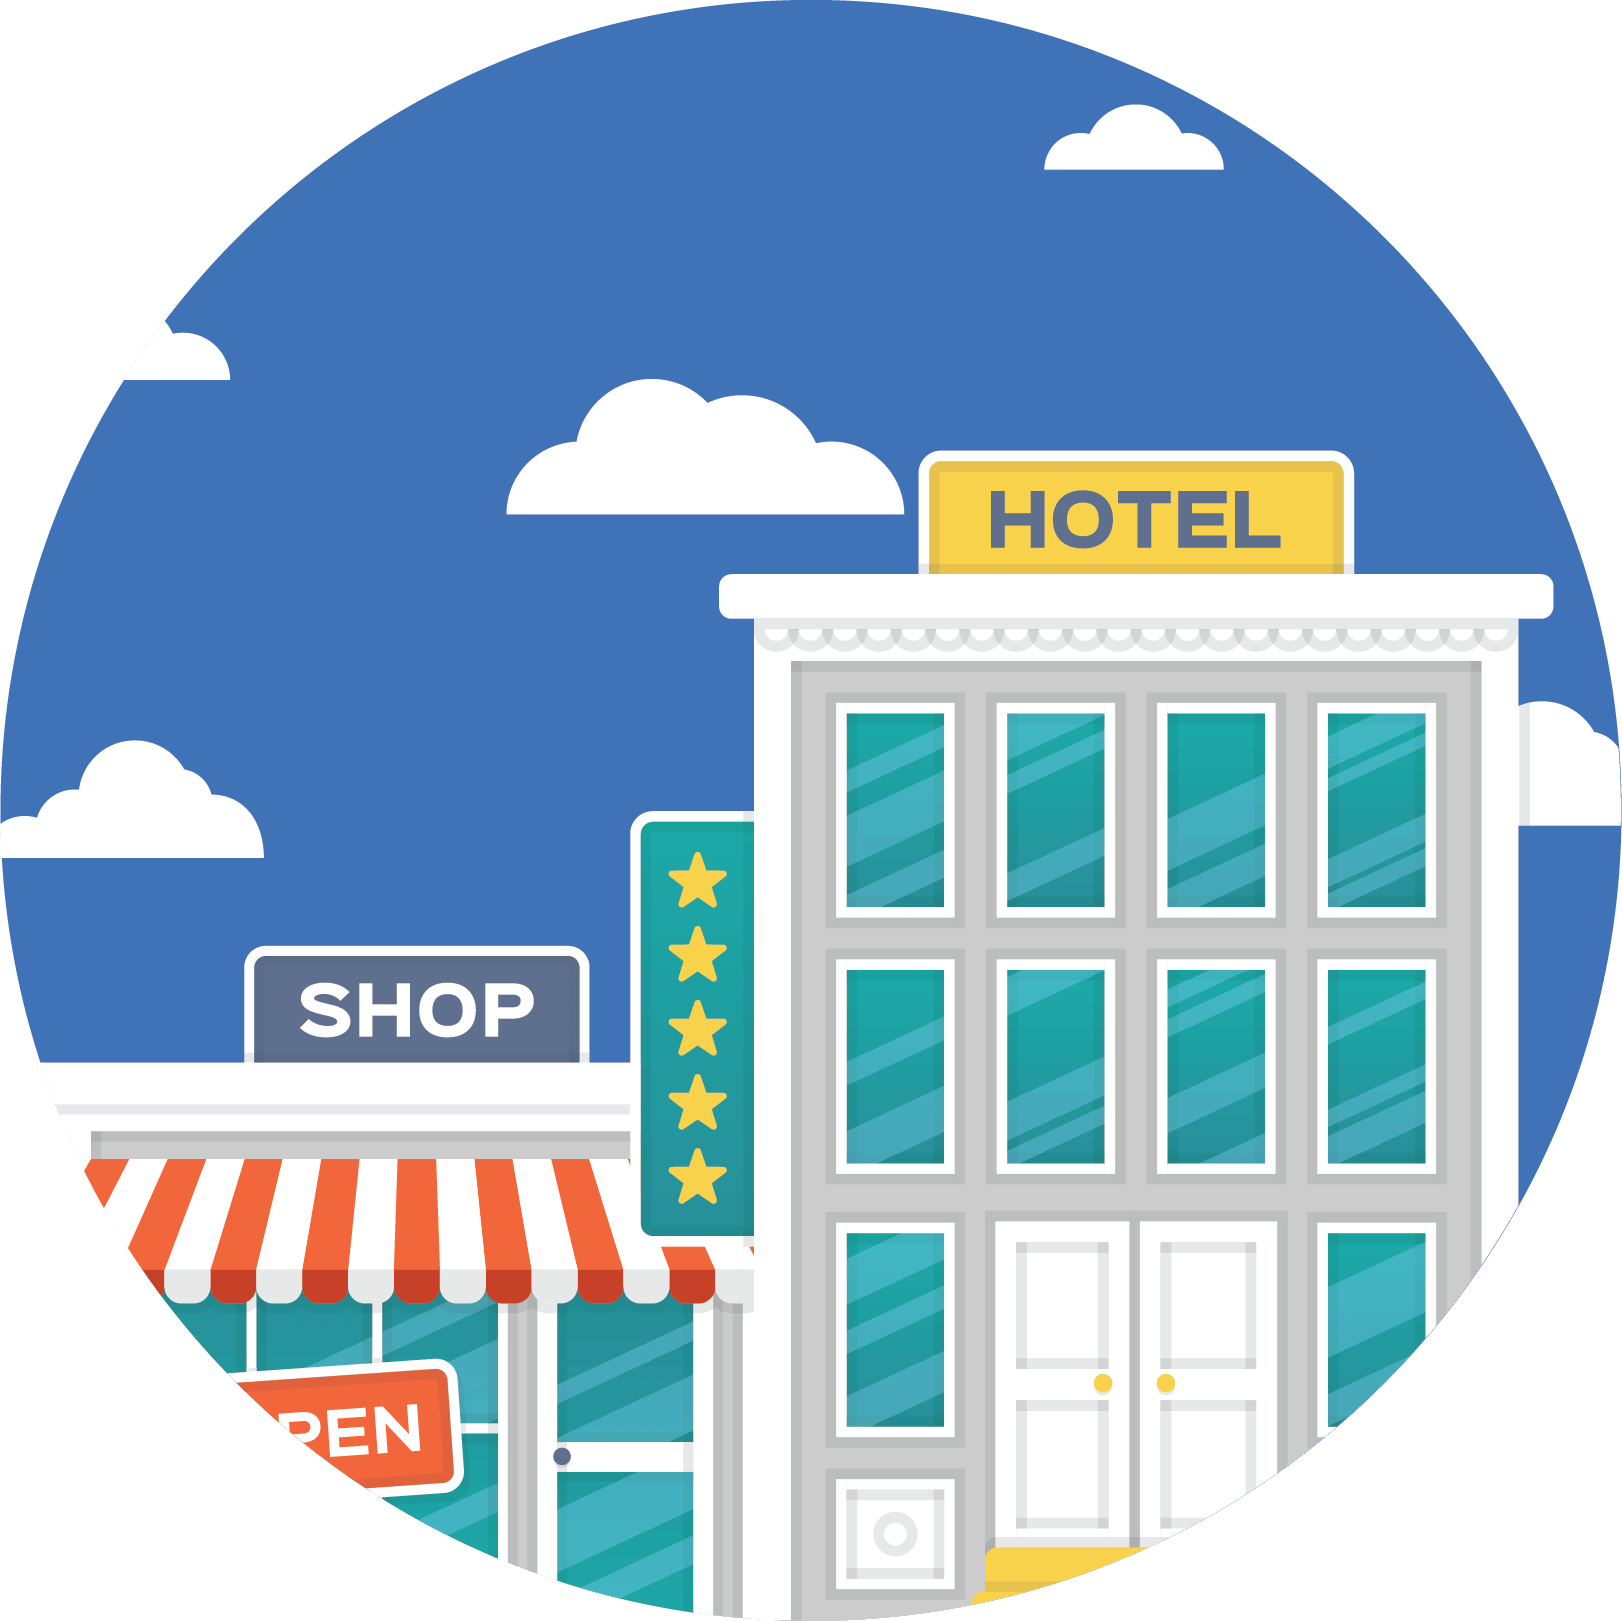 Shopping and hotel buildings icon